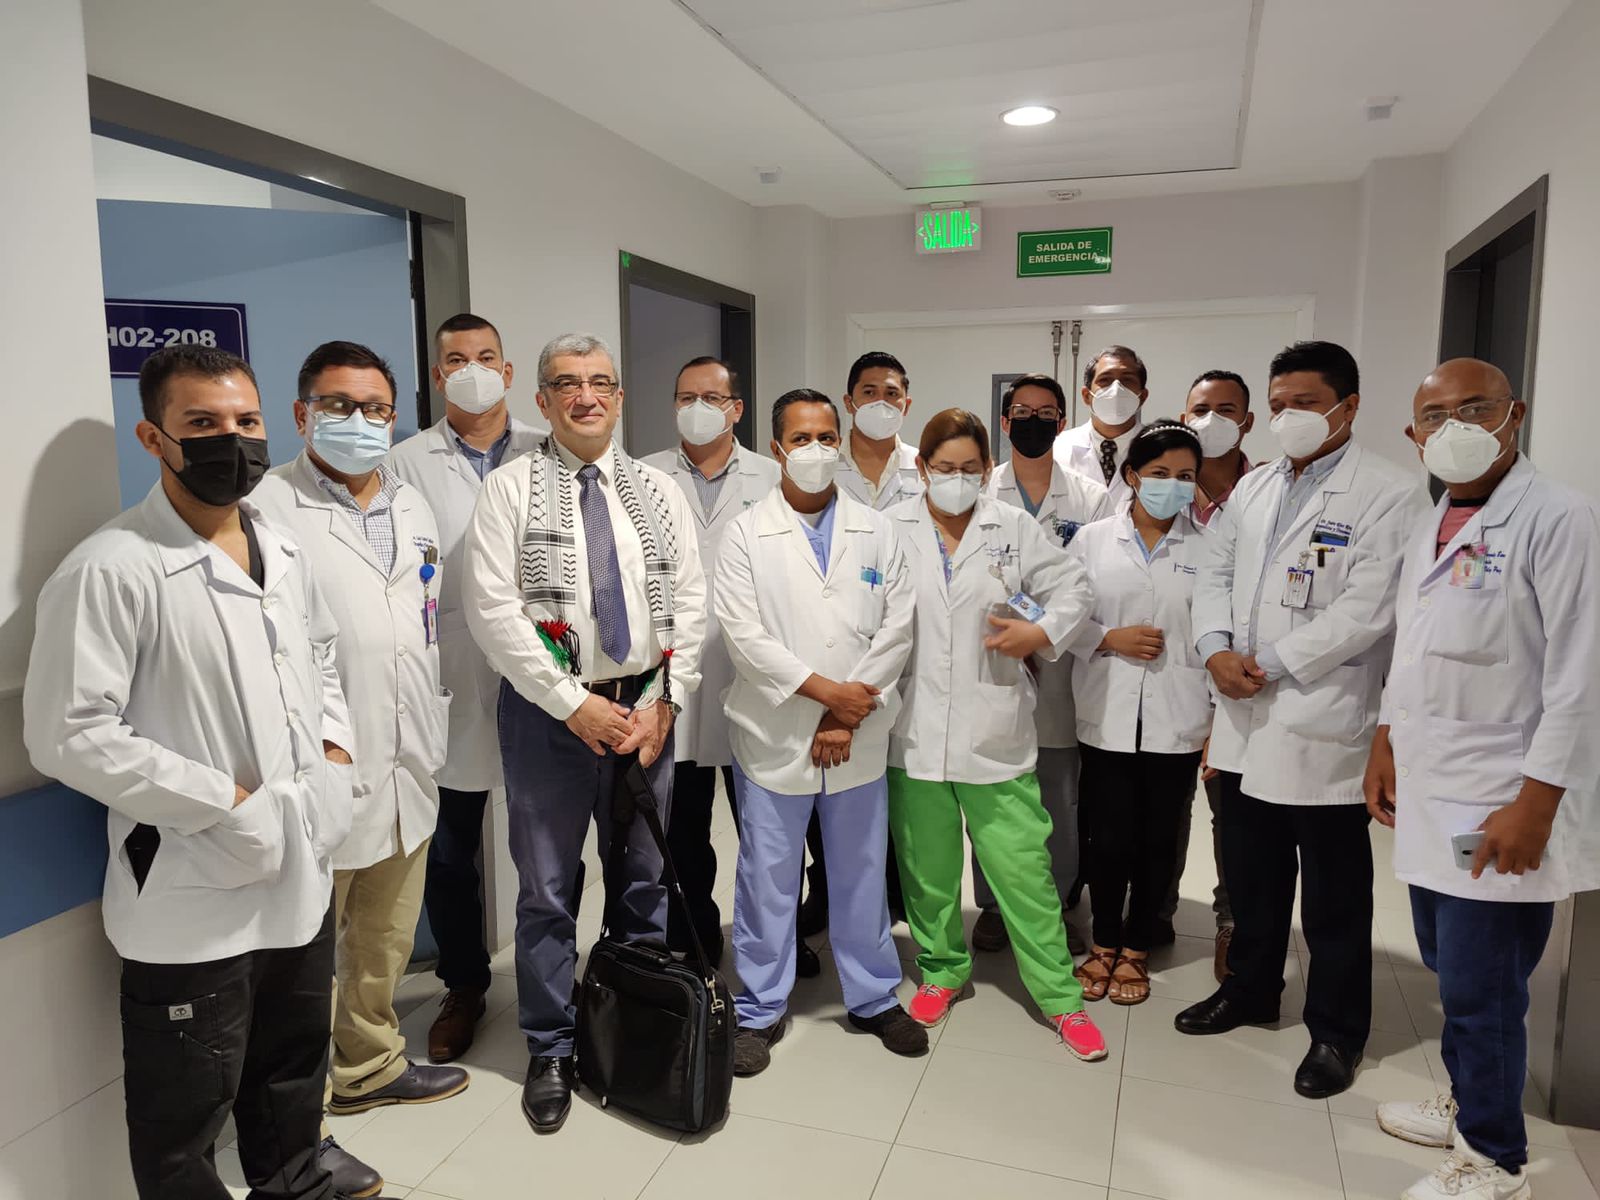 PICA COMPLETES MEDICAL PROGRAM IN NICARAGUA